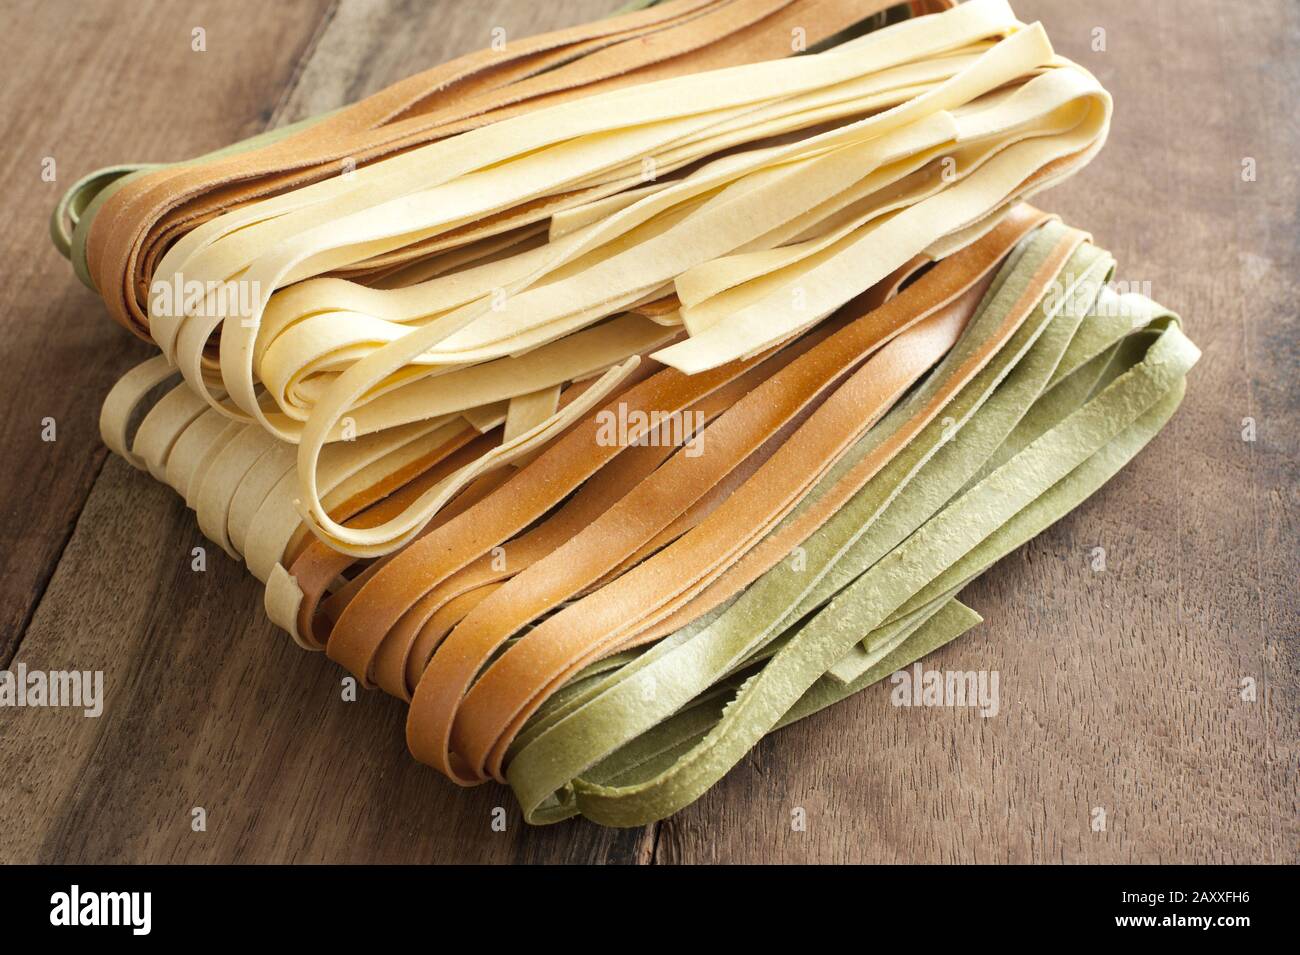 Homemade dried tagliatelle noodles in three varieties, plain, green and ...